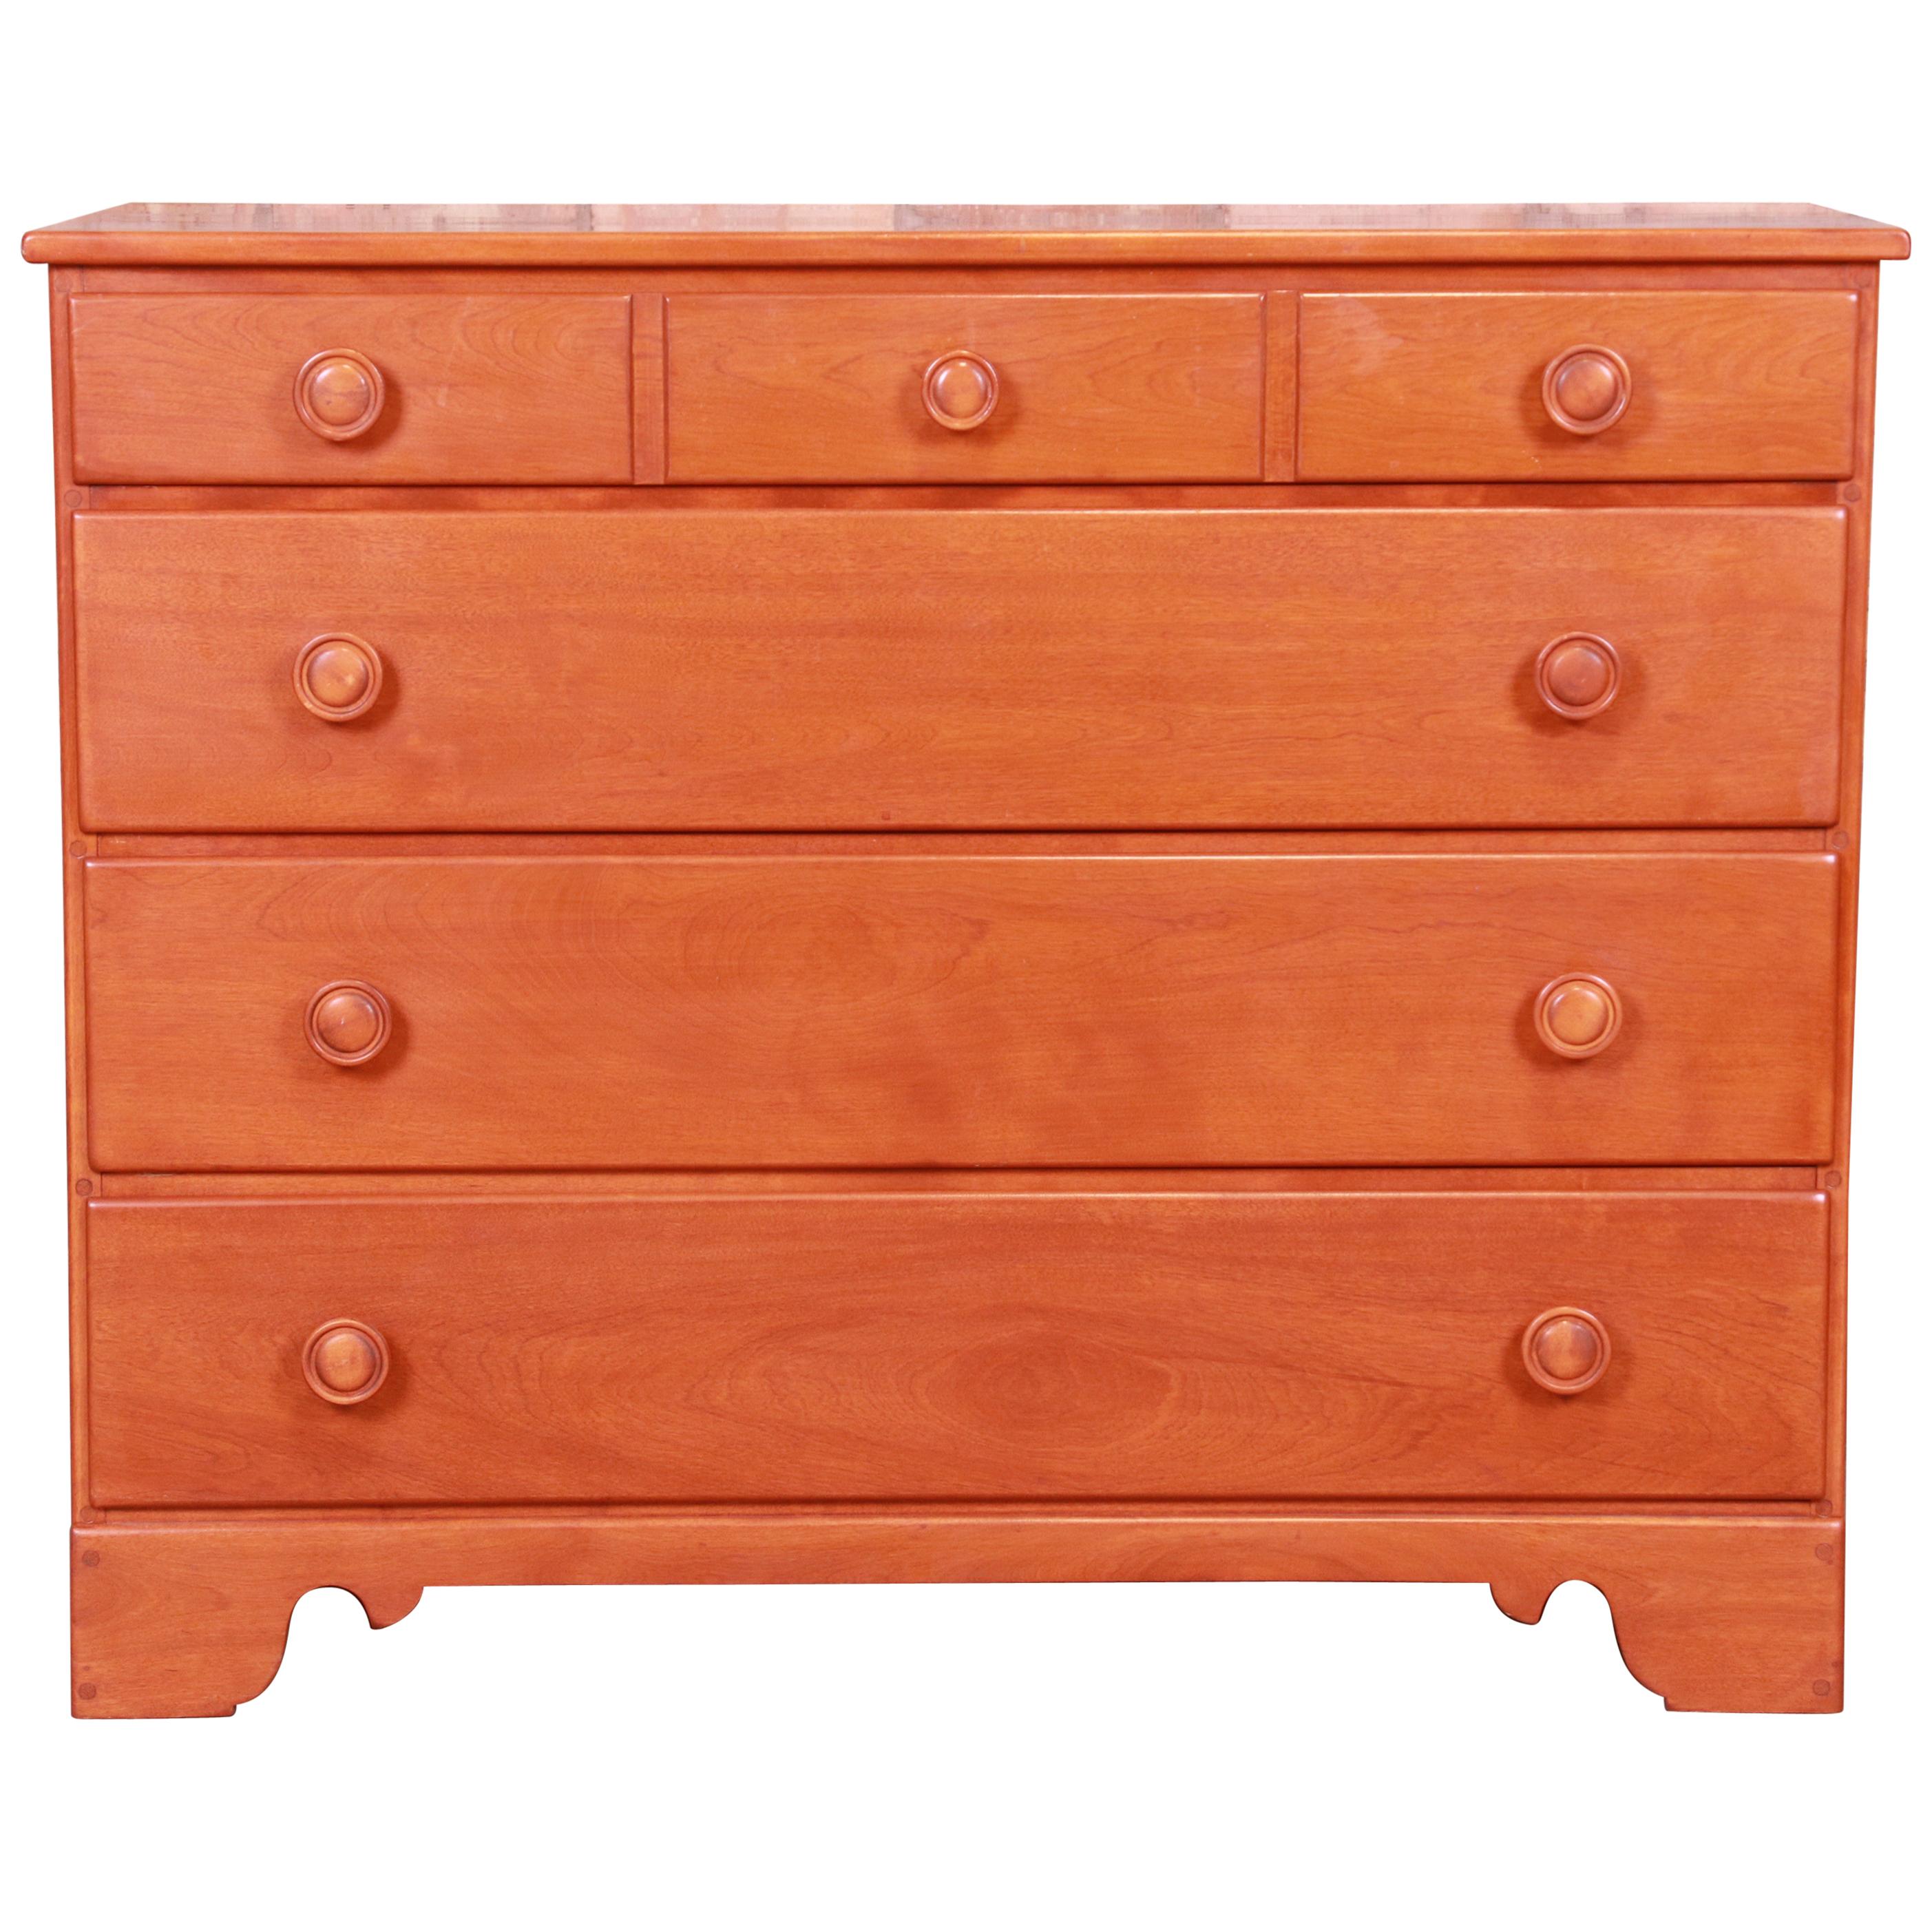 Ethan Allen American Colonial Solid Maple Chest of Drawers